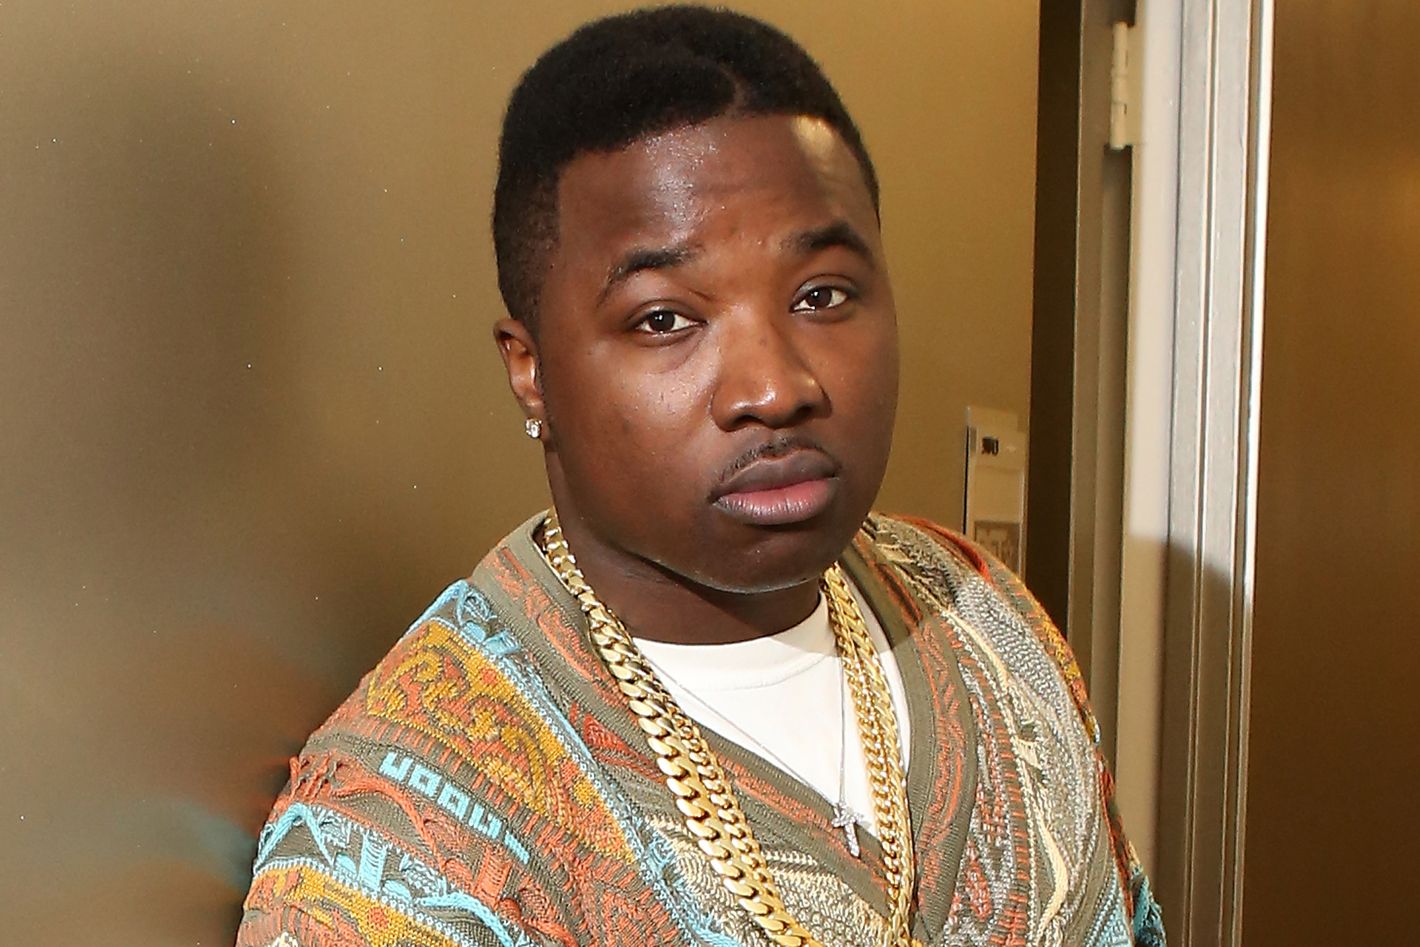 The 38-year old son of father (?) and mother(?) Troy Ave in 2024 photo. Troy Ave earned a  million dollar salary - leaving the net worth at  million in 2024